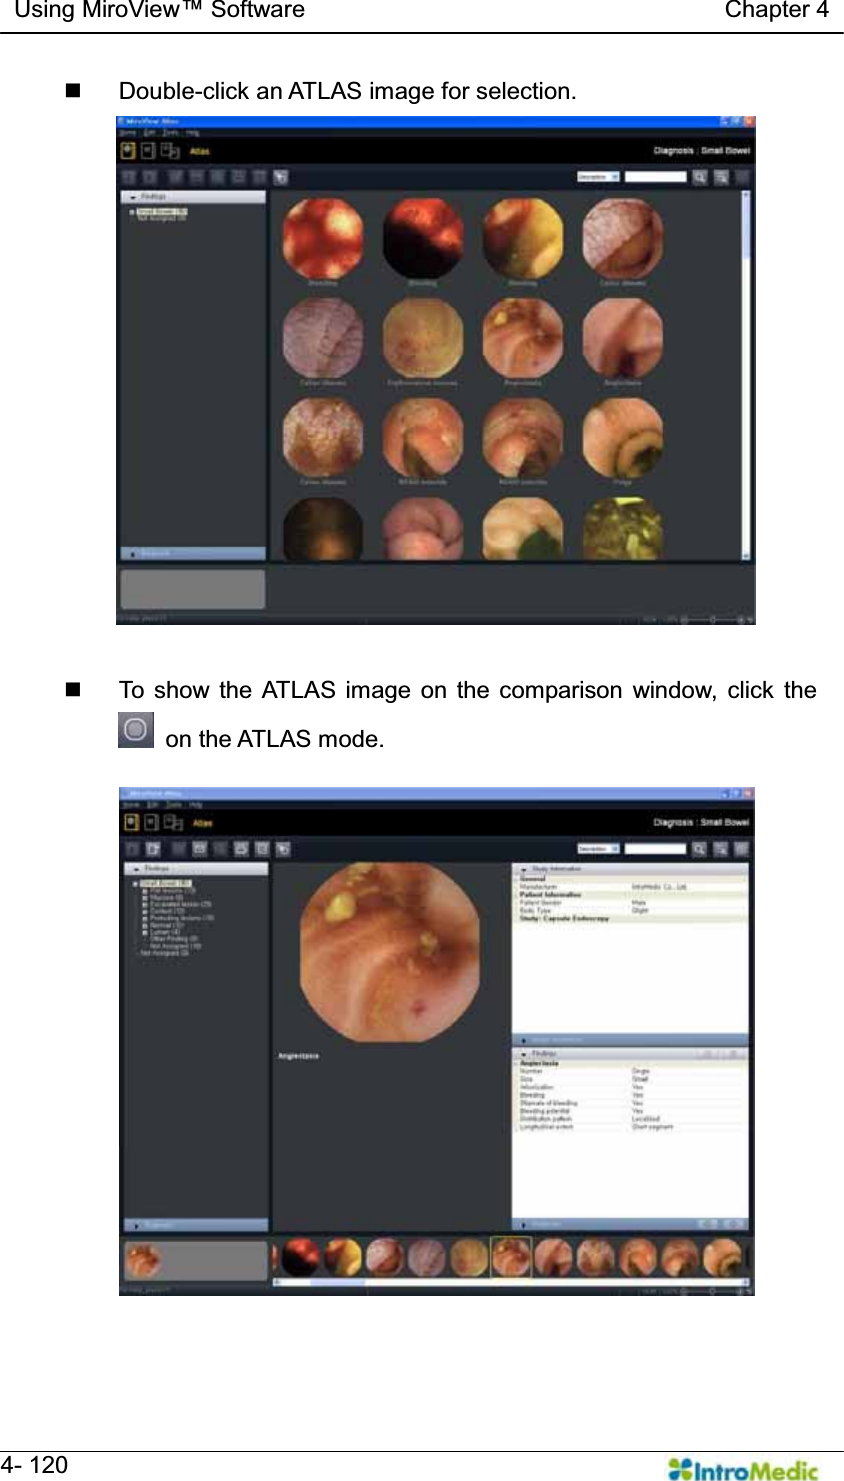   Using MiroView Software                                   Chapter 4   4- 120  Double-click an ATLAS image for selection.    To show the ATLAS image on the comparison window, click the  on the ATLAS mode.  